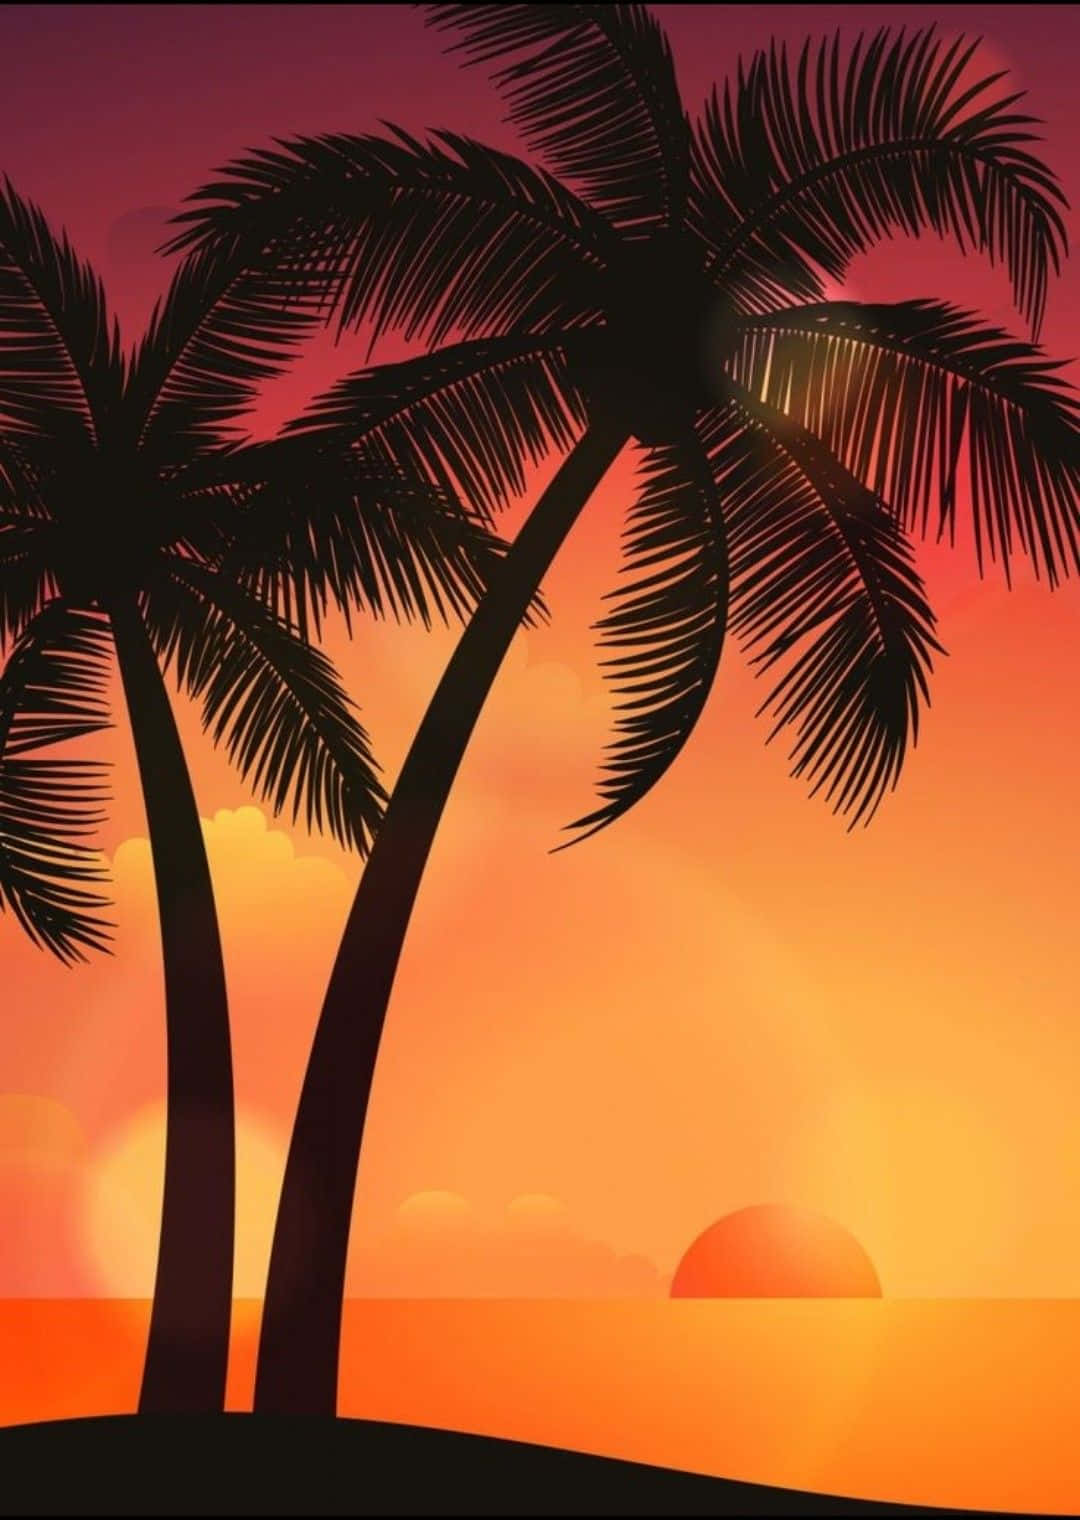 [100+] Palm Trees Beach Pictures | Wallpapers.com